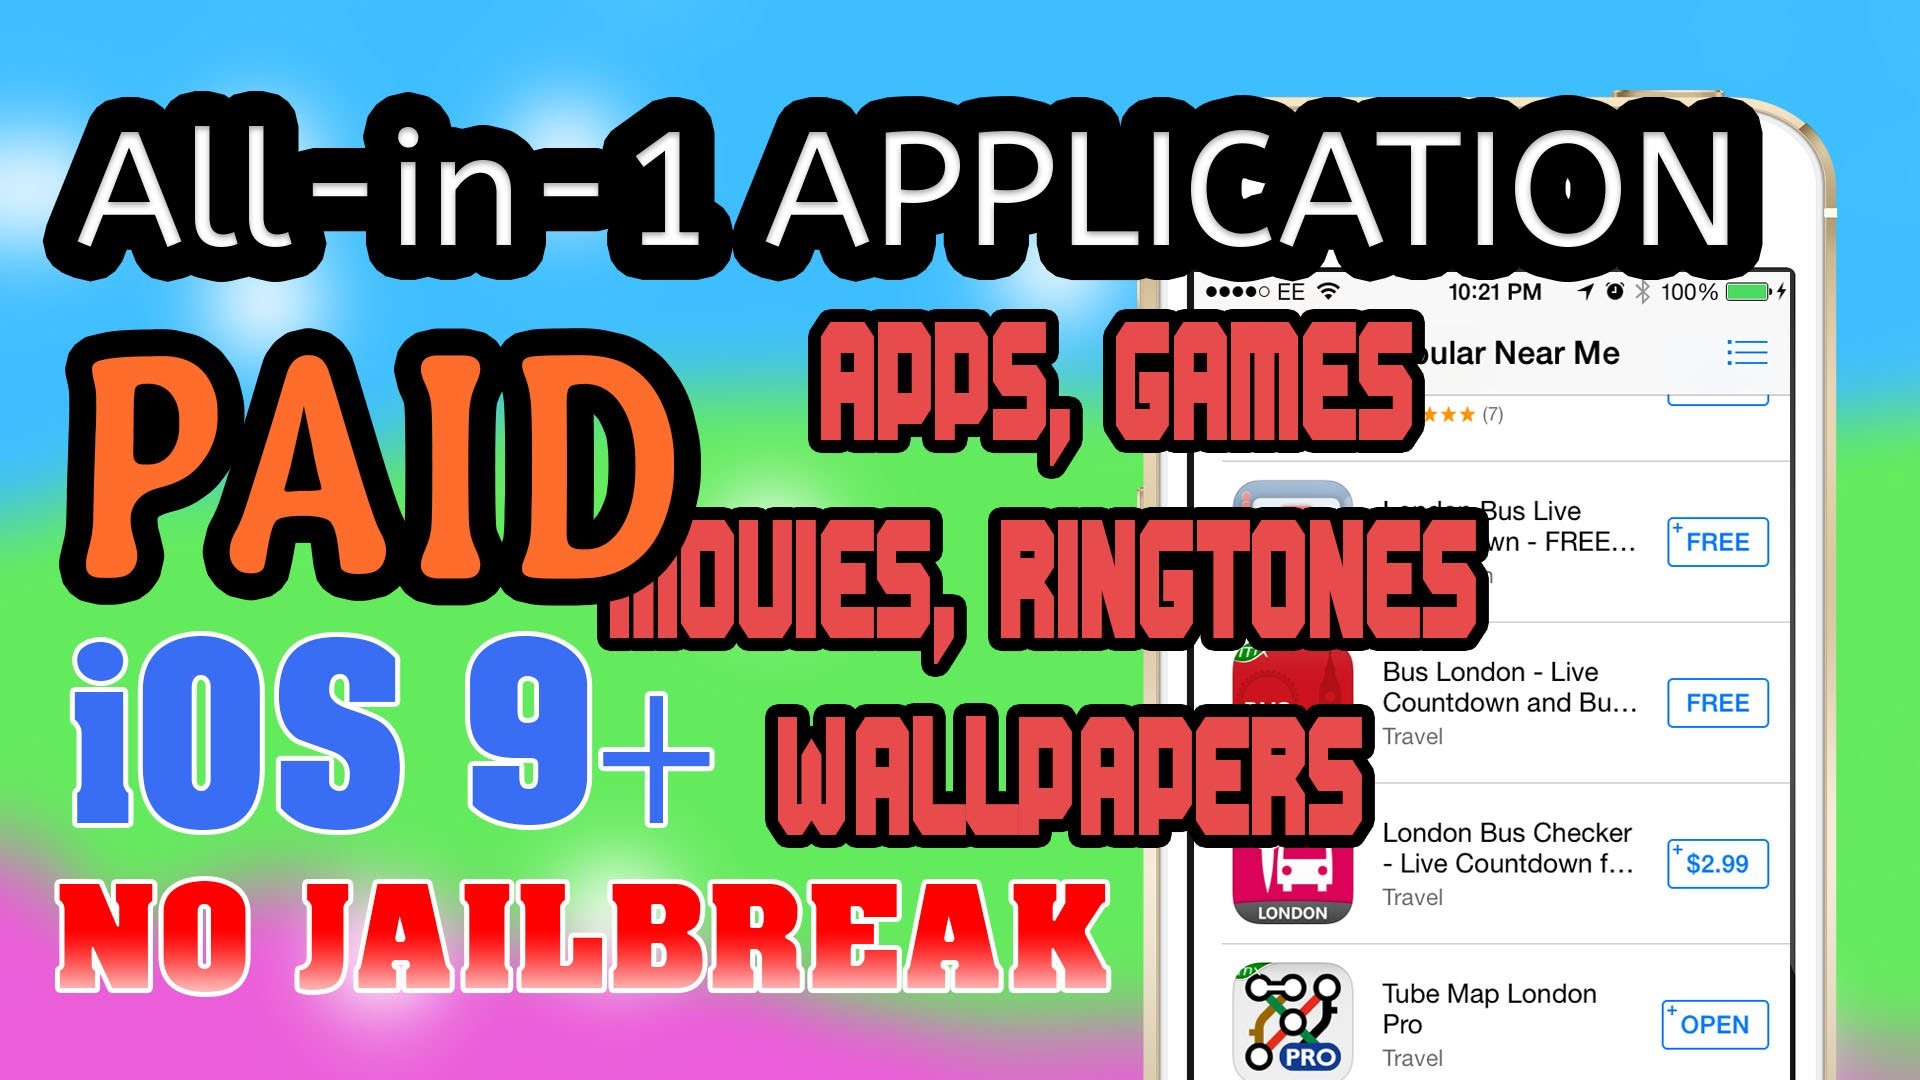 1920x1080 All-in-1 App: Paid Apps, Games, Ringtone, Wallpapers (NO JAILBREAK) iPhone  iPad iPod Touch iOS 9